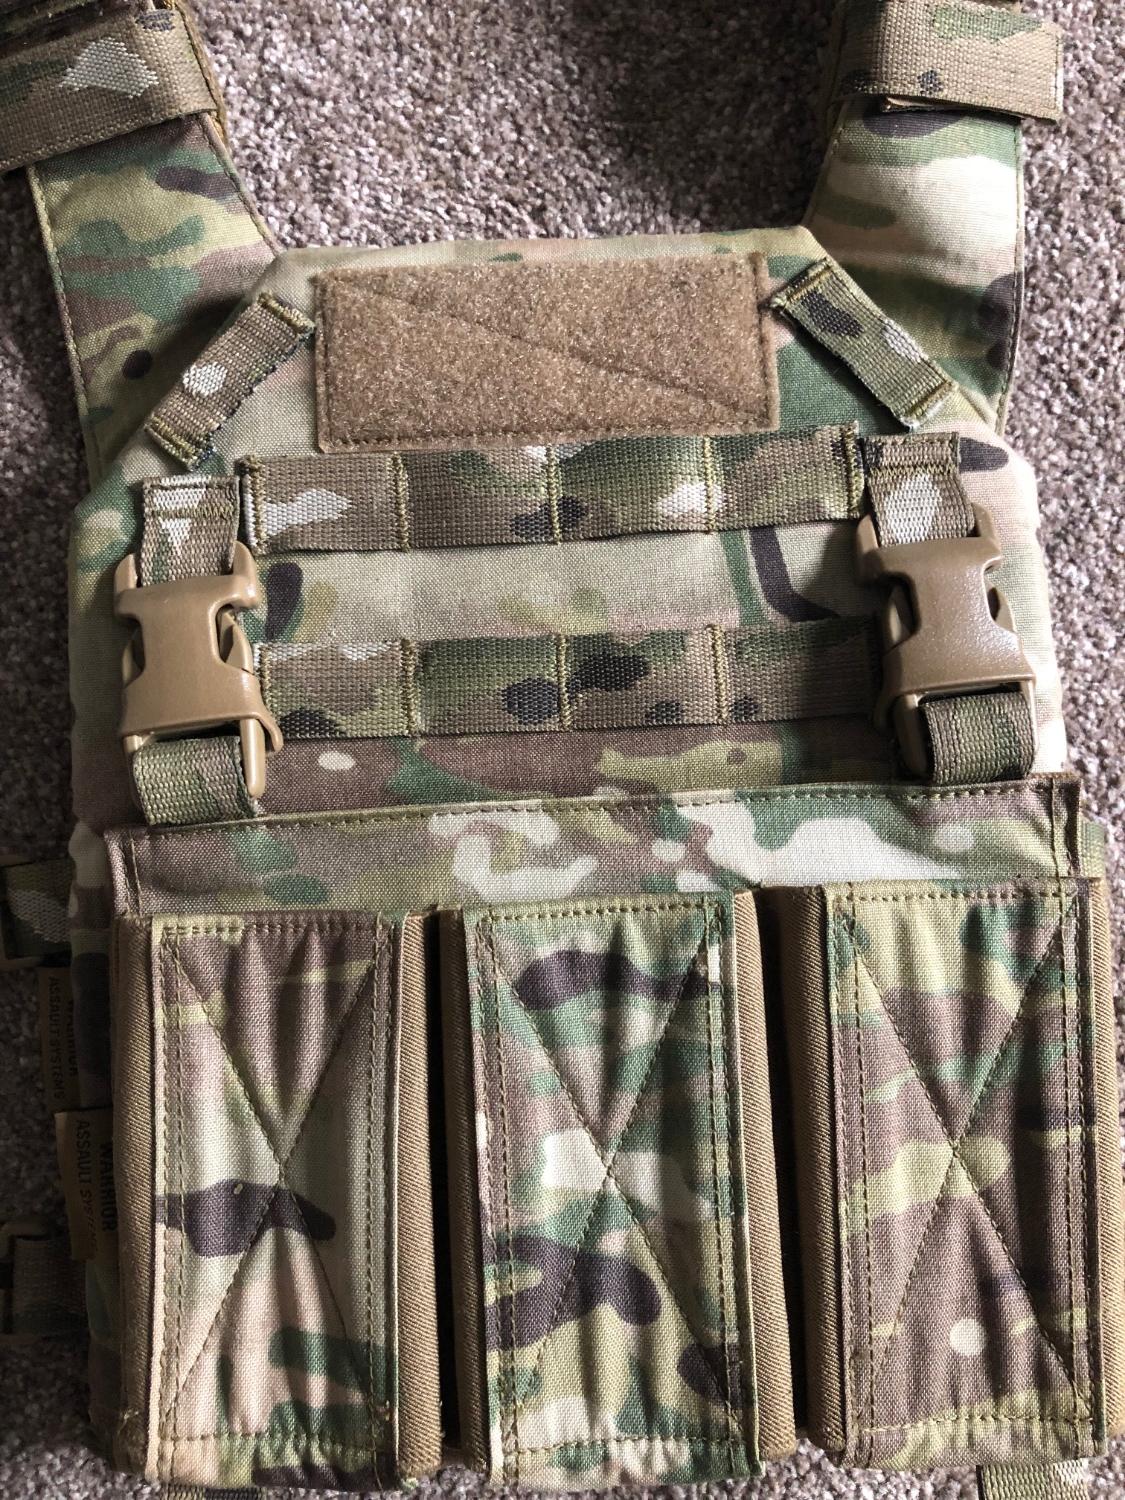 Warrior assault systems package(RPC, drop down pouch, triple mag pouch ...